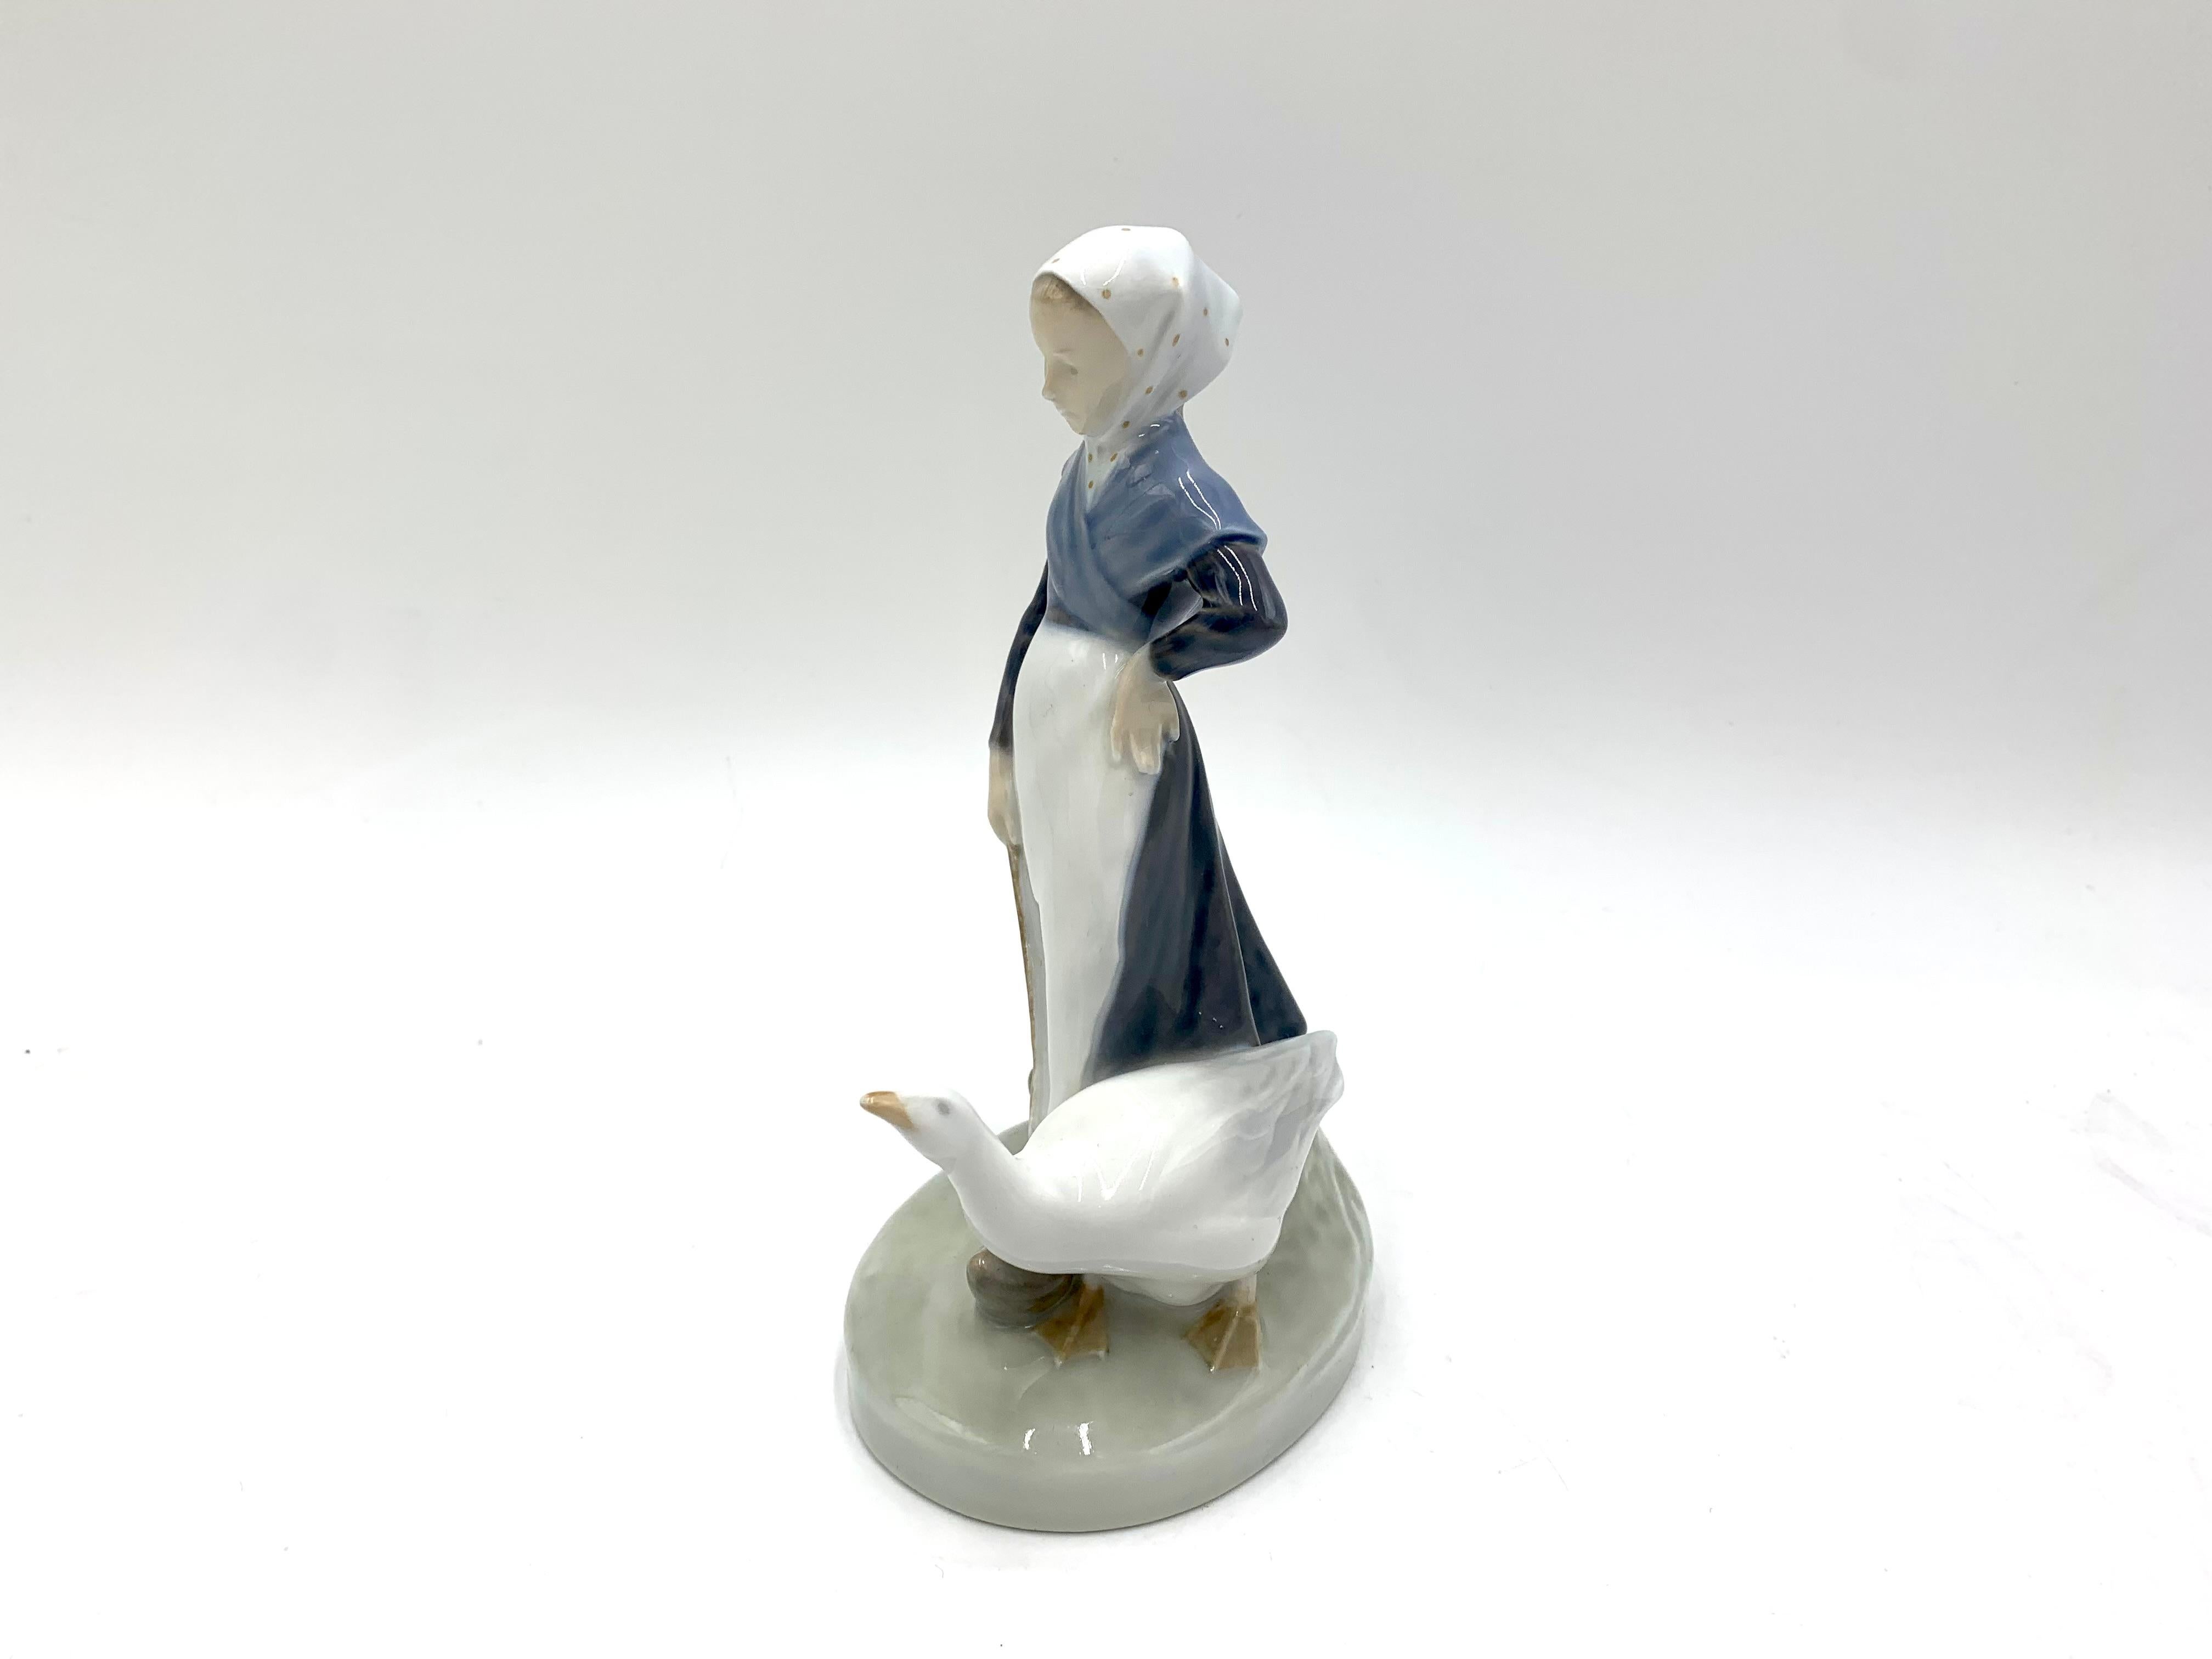 Porcelain figurine of a woman with a goose

Made in Denmark by the Royal Copenhagen manufactory

Manufactured in the 1960s.

Model number # 528

Very good condition, no damage.

Measures: height 19cm width 11cm depth 8cm.